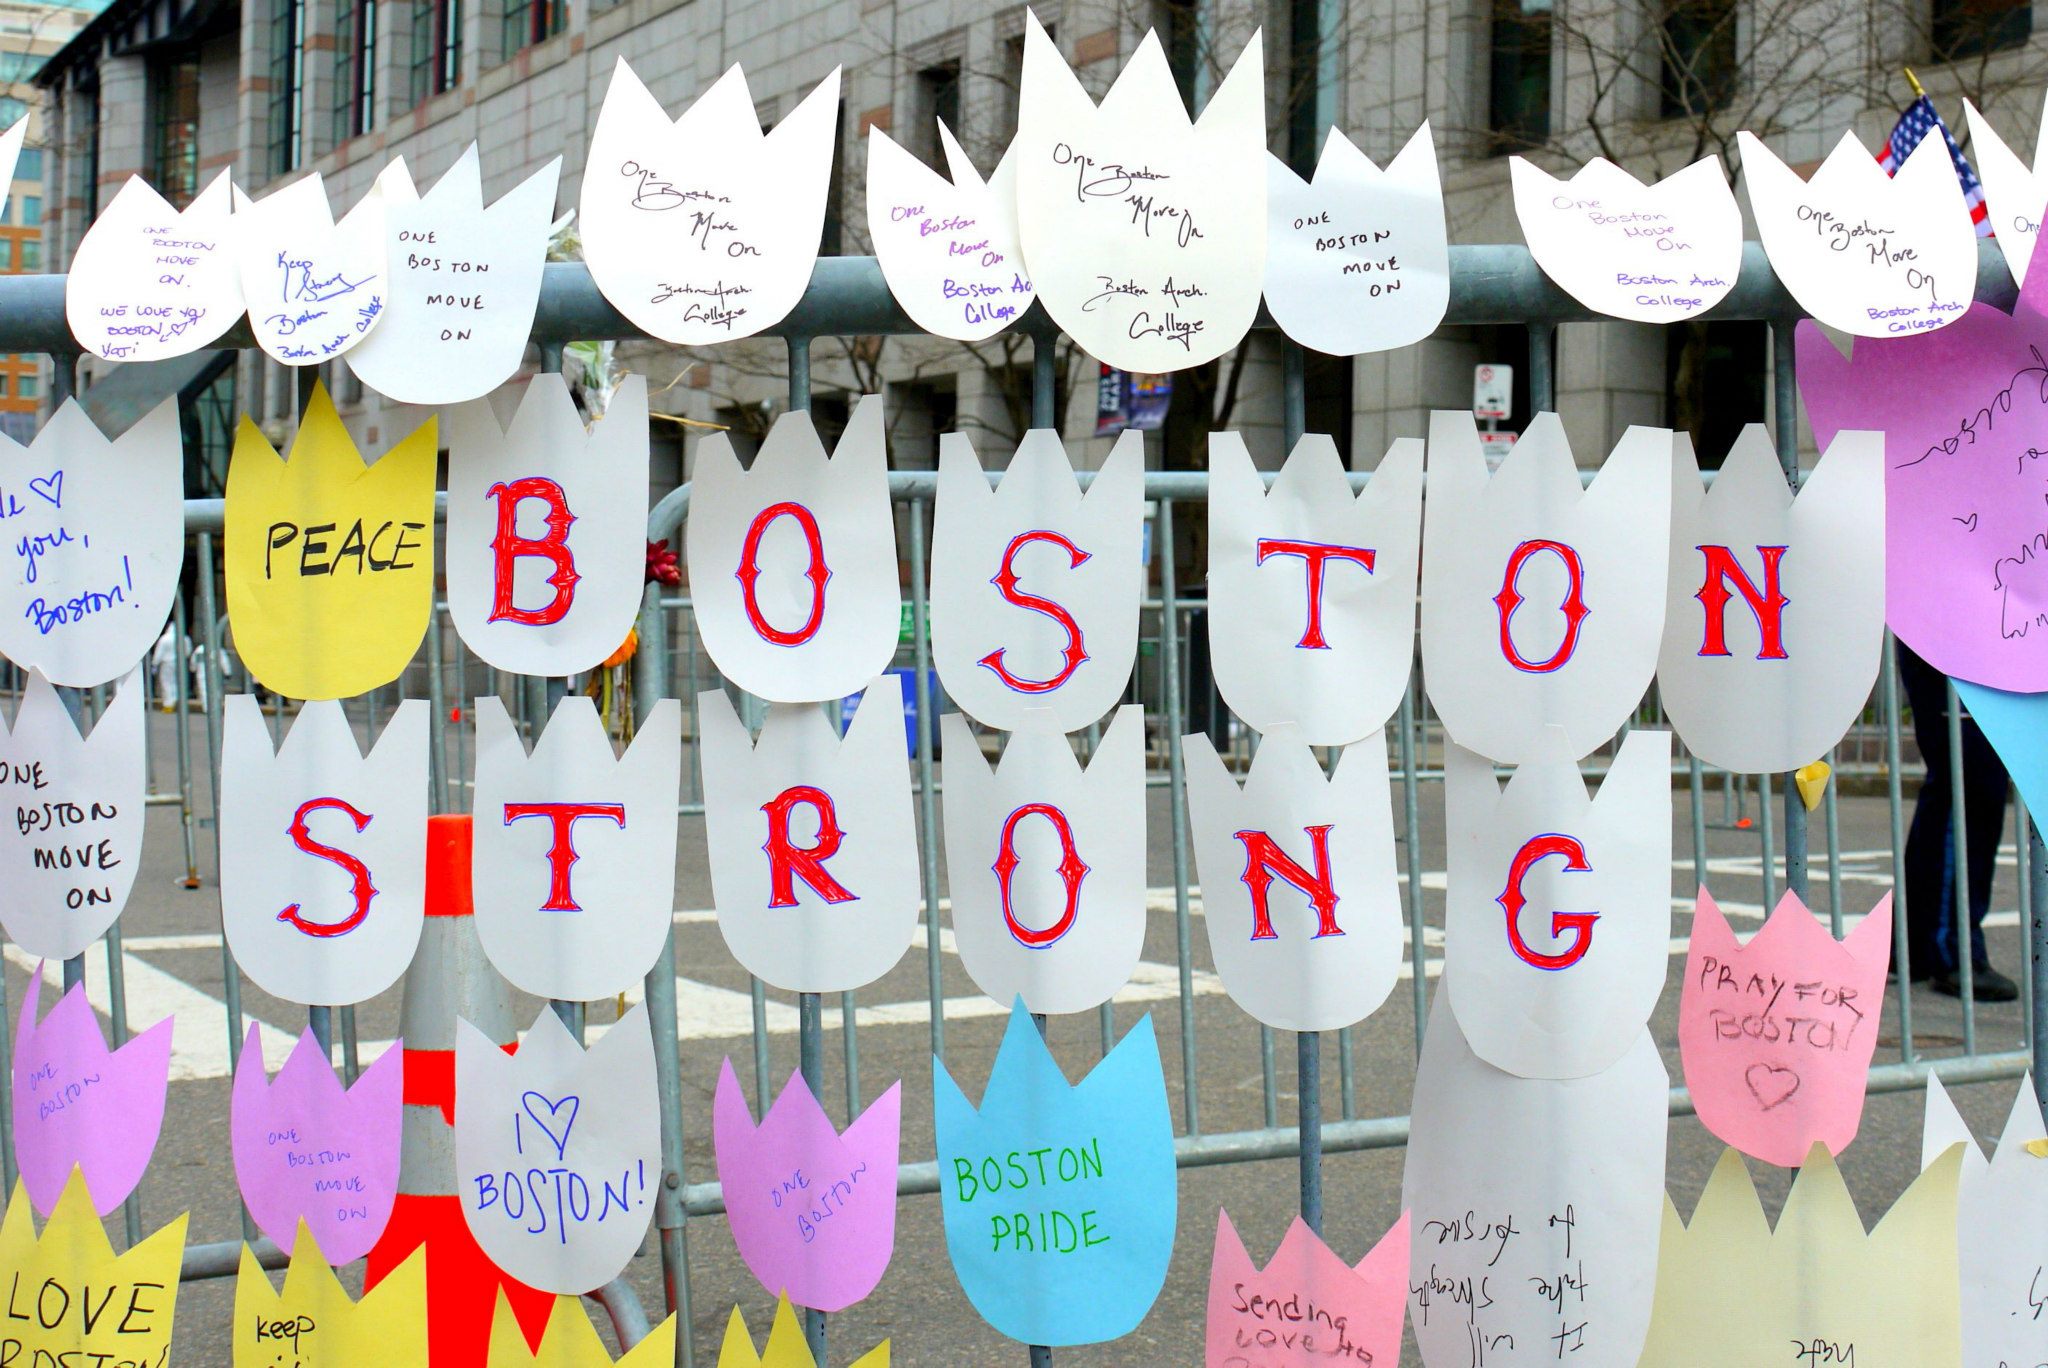    Boston Marathon 2013 |  Strength, support and resilience  